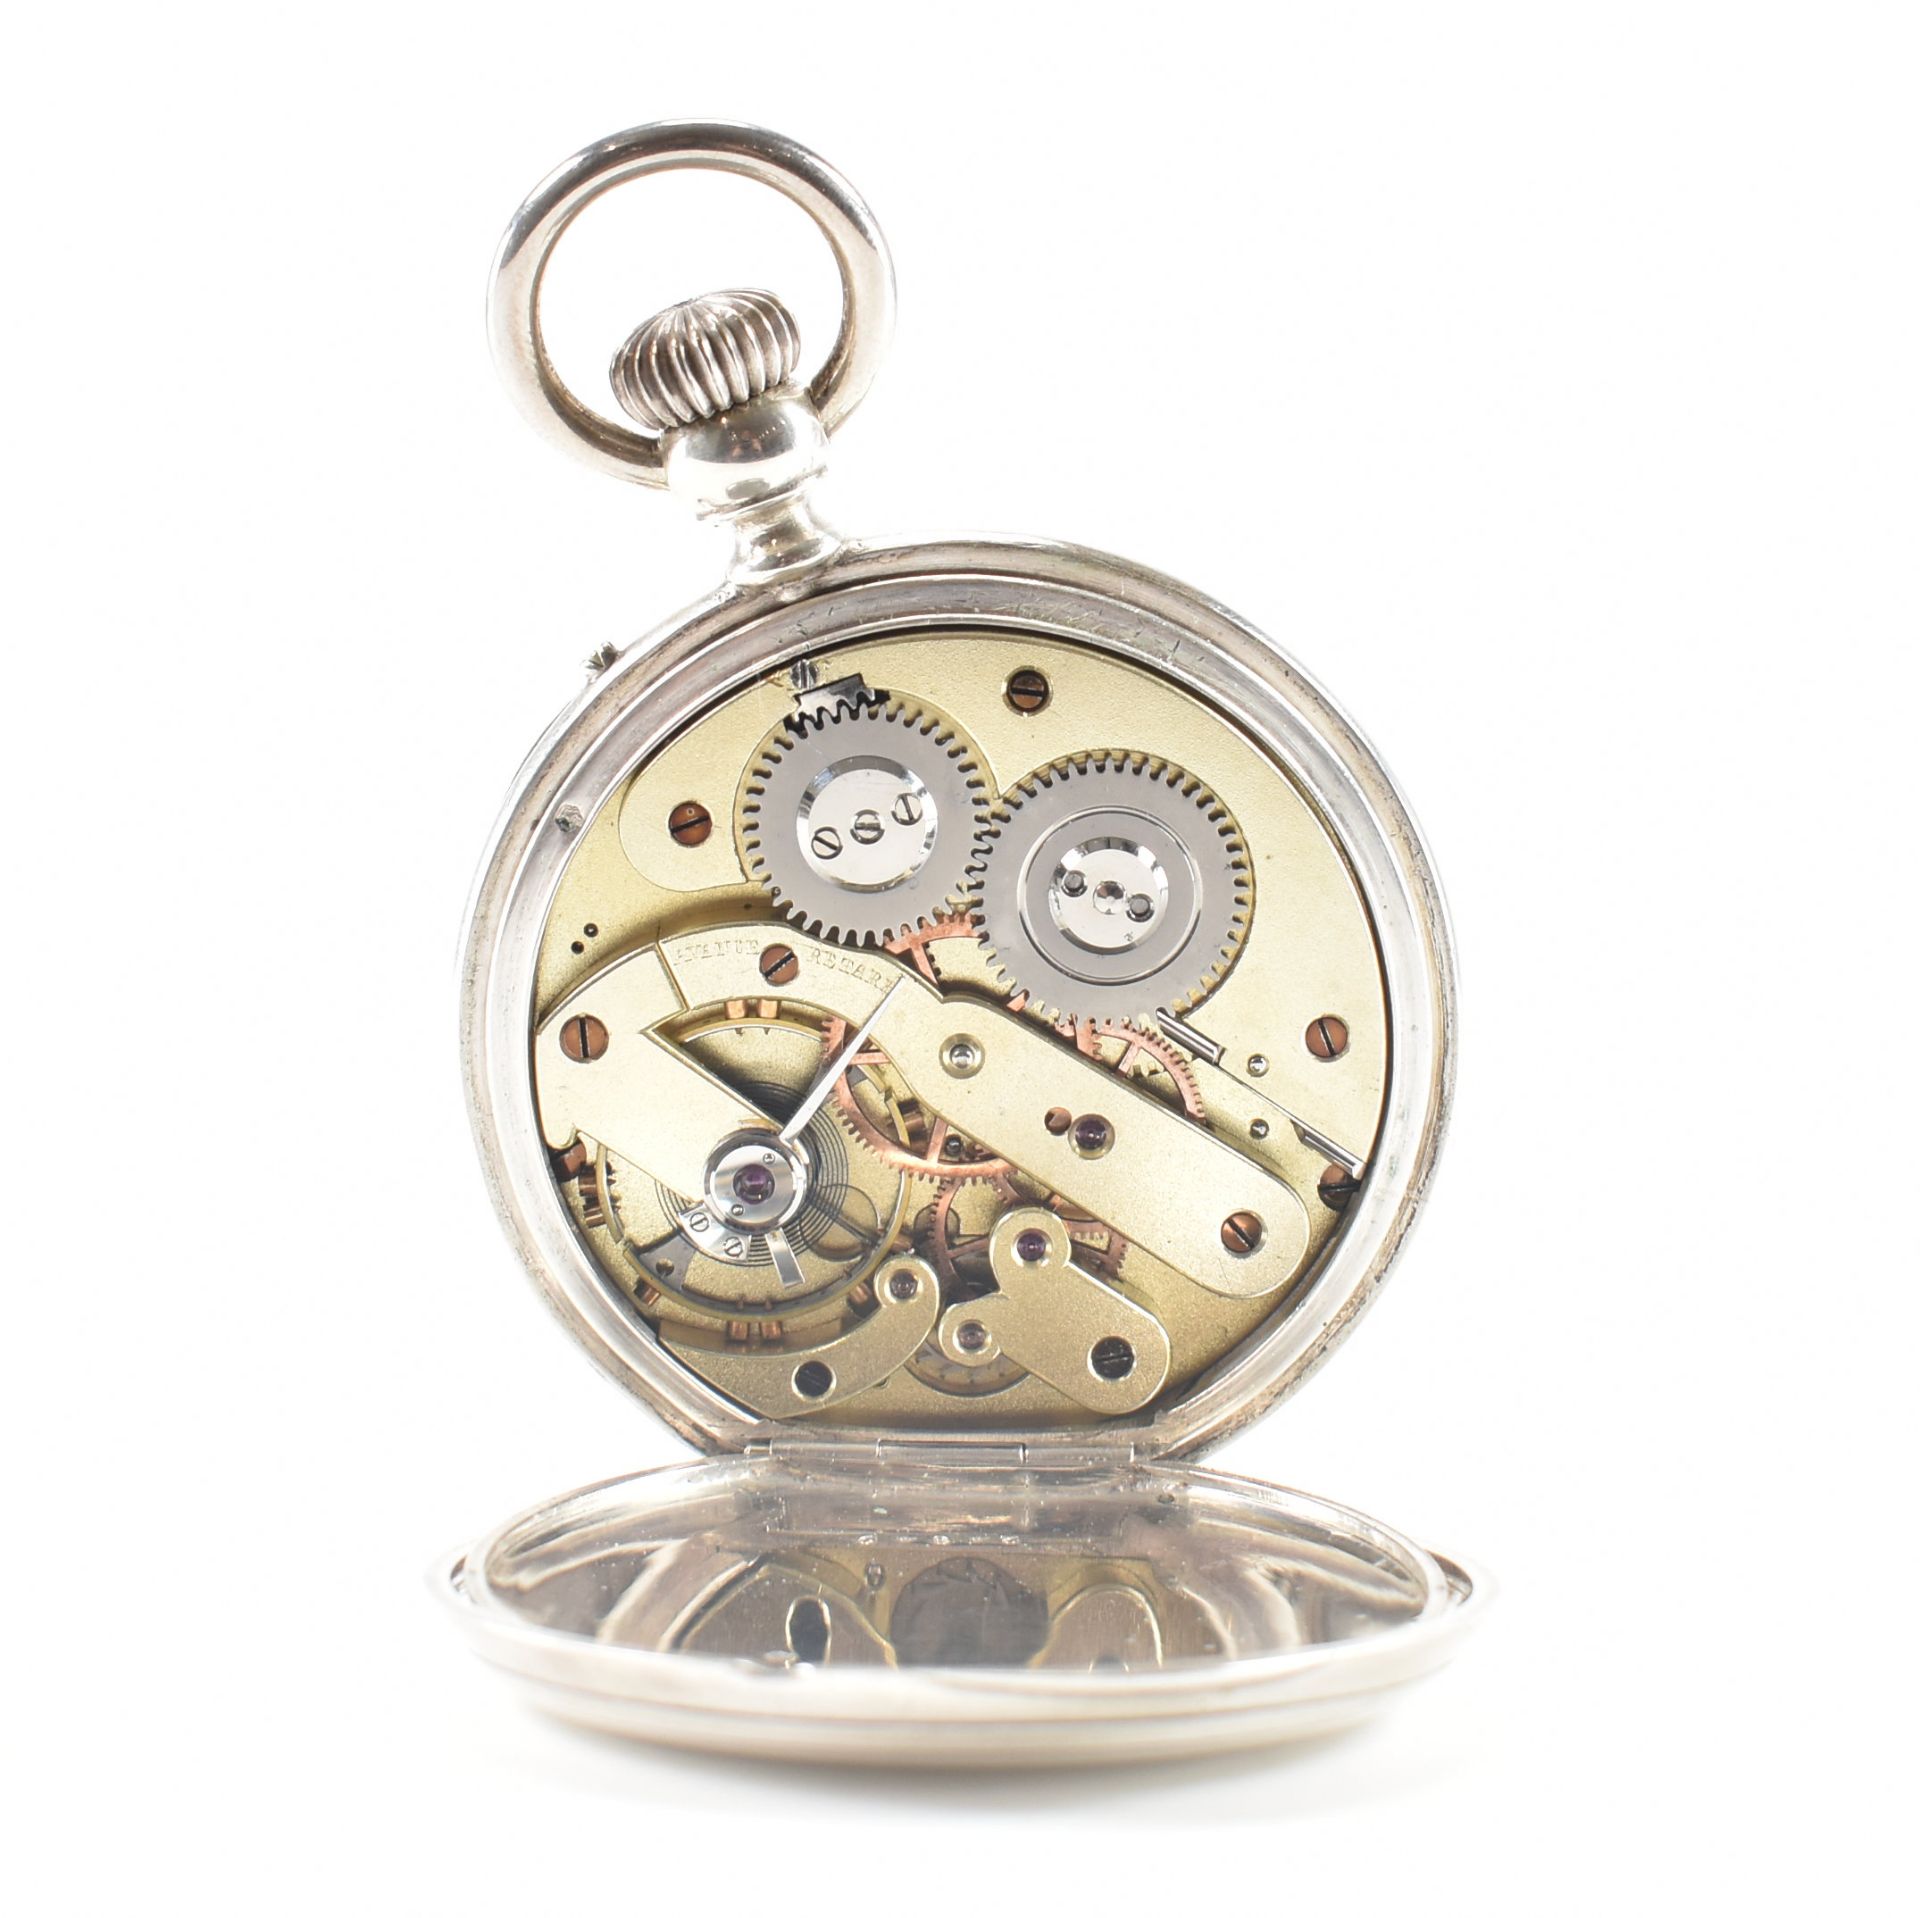 ANTIQUE FRENCH SILVER OPEN FACE POCKET WATCH - Image 6 of 7